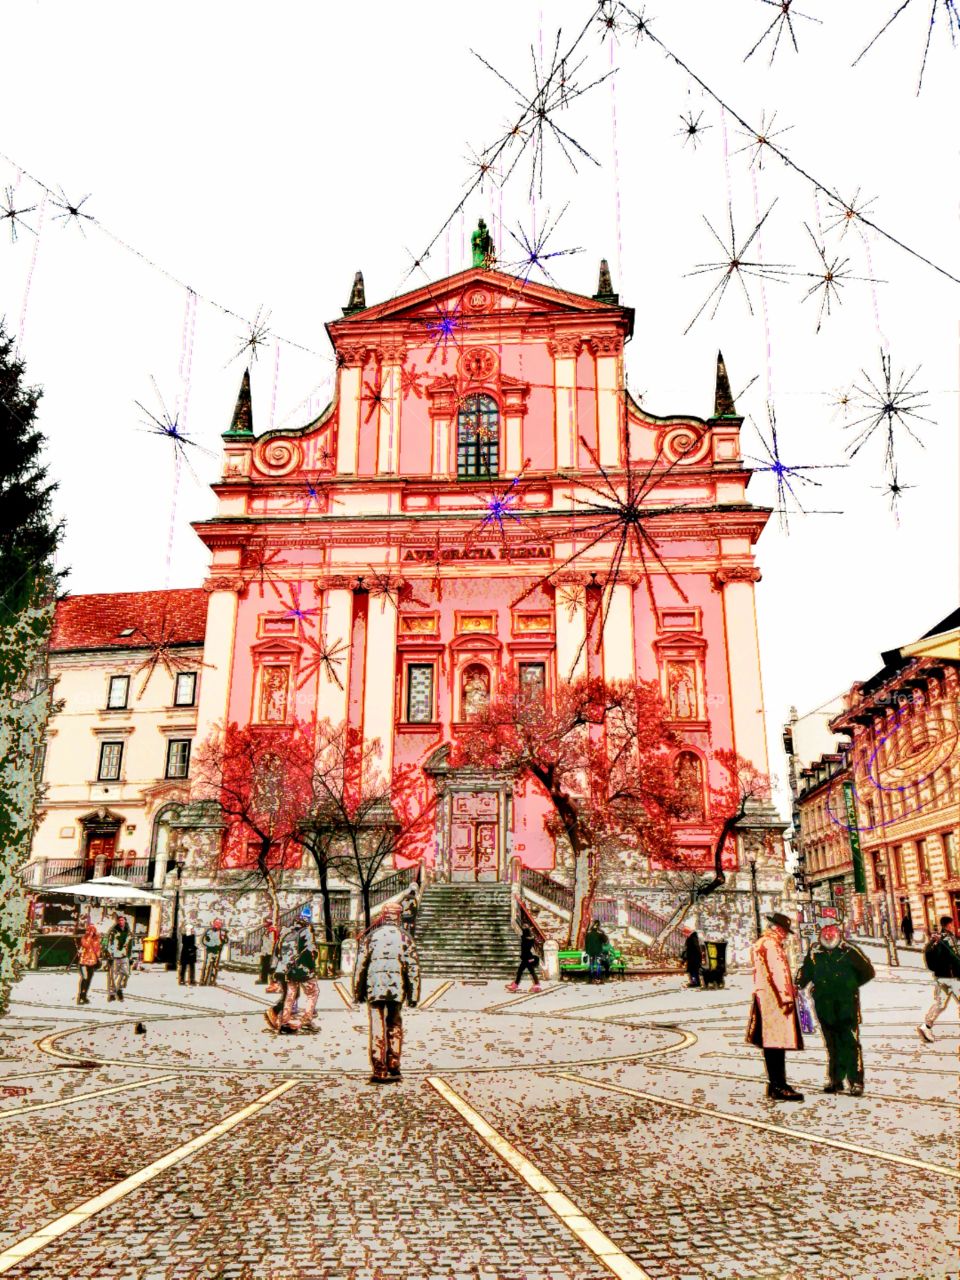 Red Franciscan Church of Annunciation in historic Oldtown Ljubljana, Slovenia, at Preseren Square in Winter